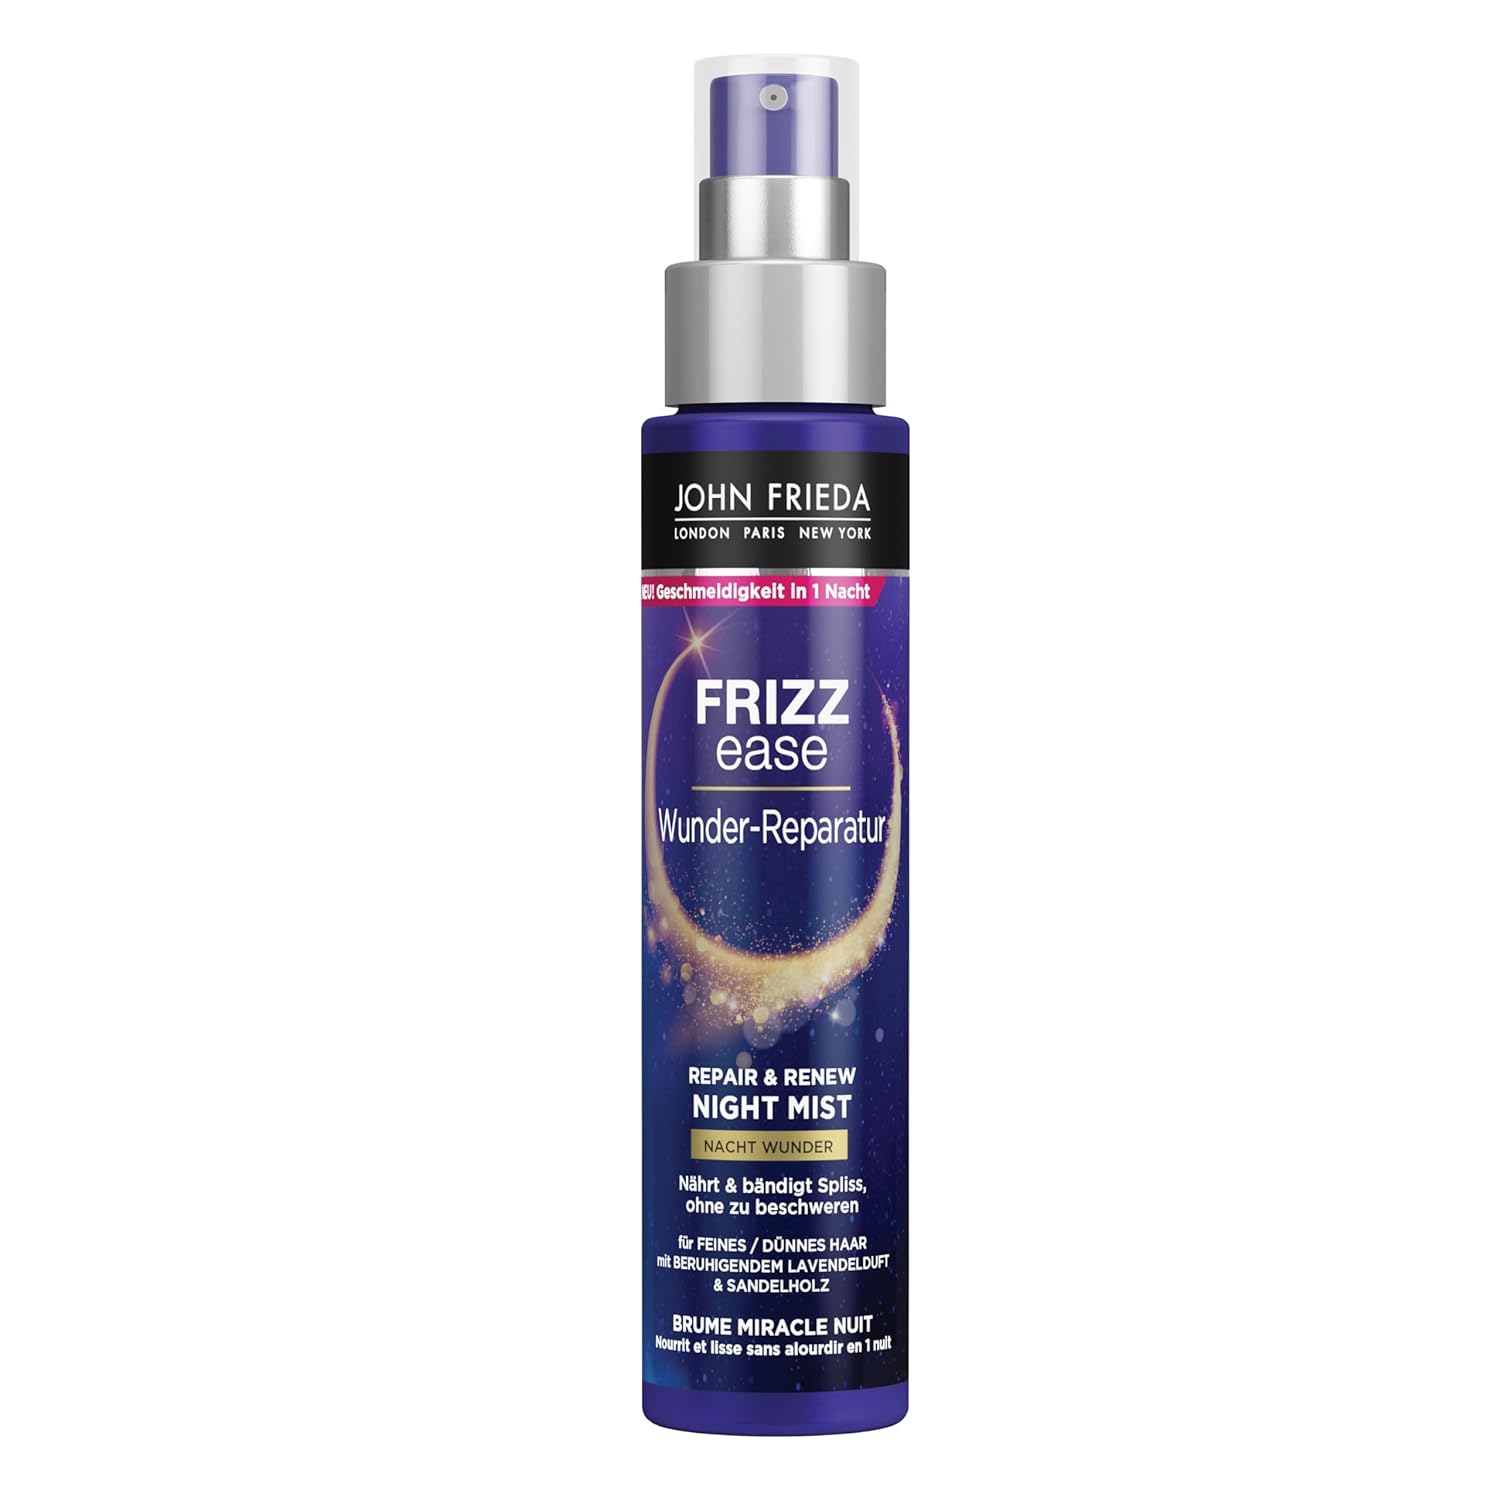 John Frieda Miracle Repair Night Miracle Moisturising Spray - Contents: 100 ml - Frizz Ease Series - For Fine, Thin Hair